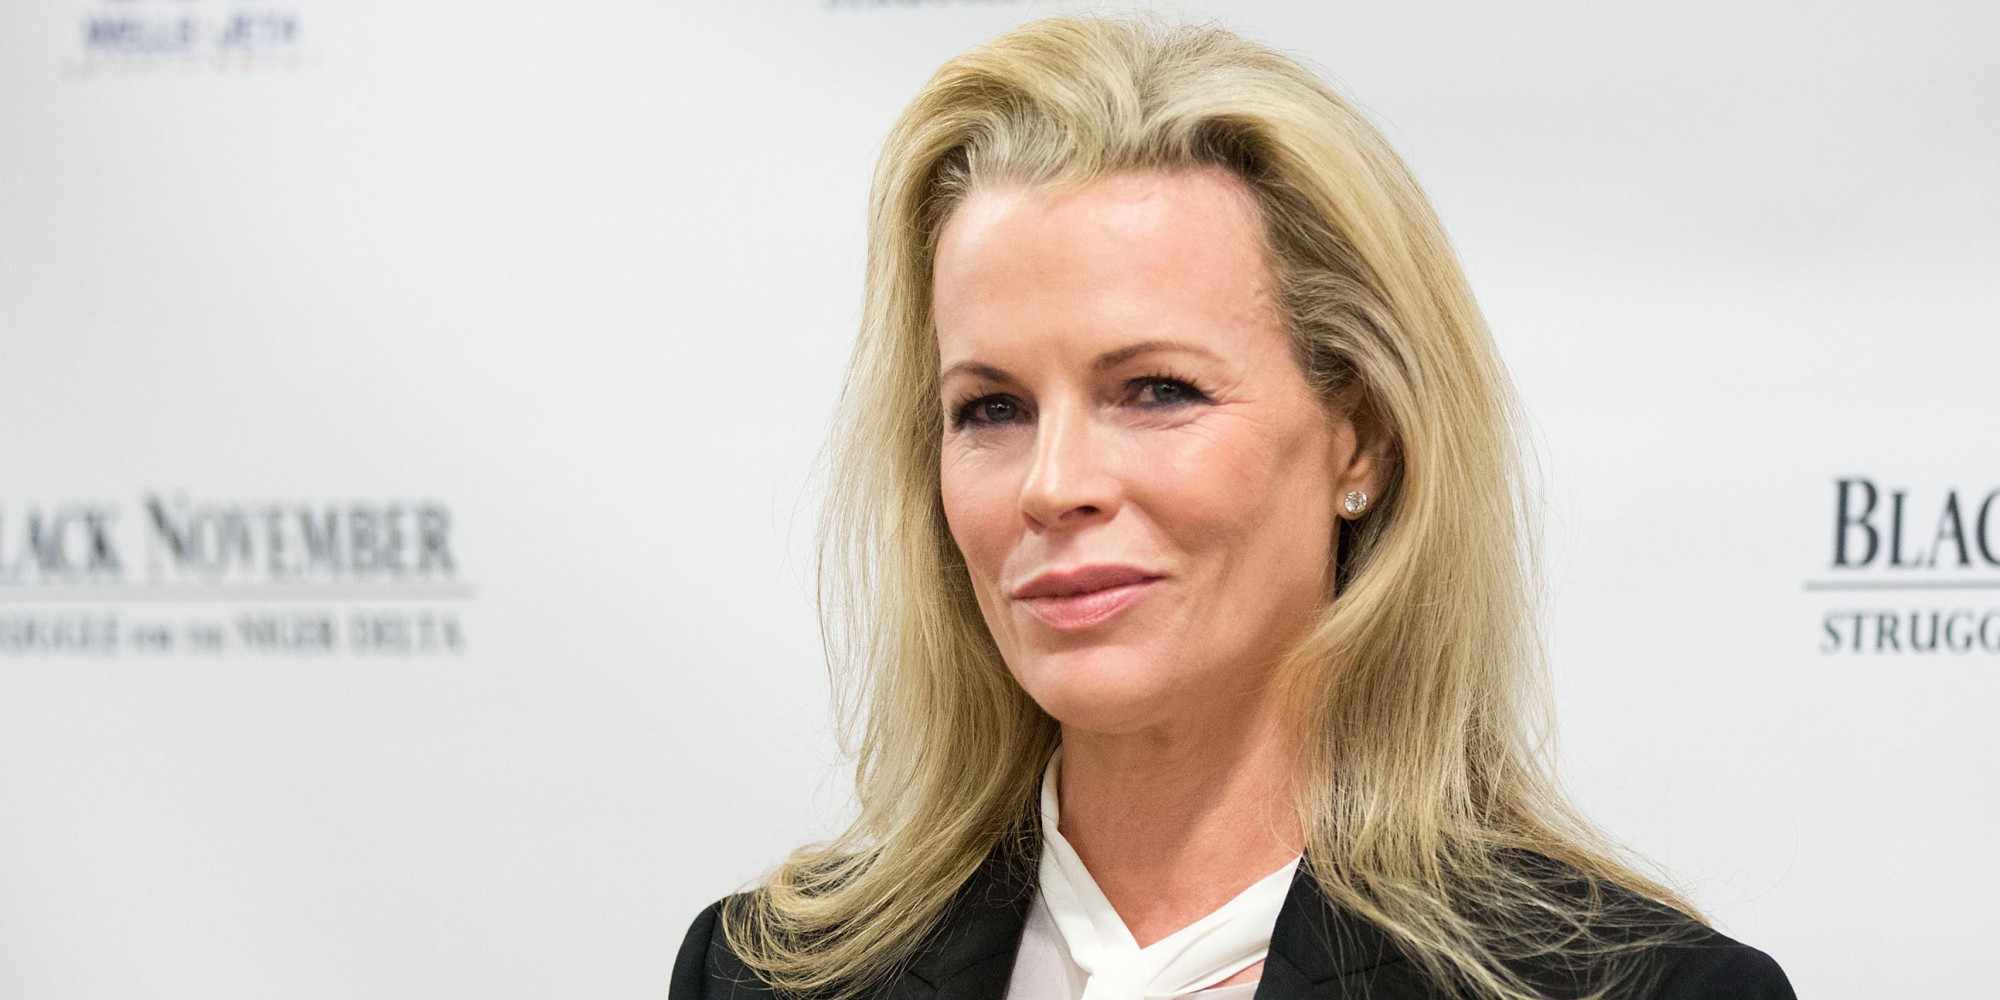 NEW YORK, NY - SEPTEMBER 26: Kim Basinger attends the "Black November" New York City Premiere at United Nations on September 26, 2012 in New York City. (Photo by Dario Cantatore/Getty Images for Wells and Jeta Entertainment)